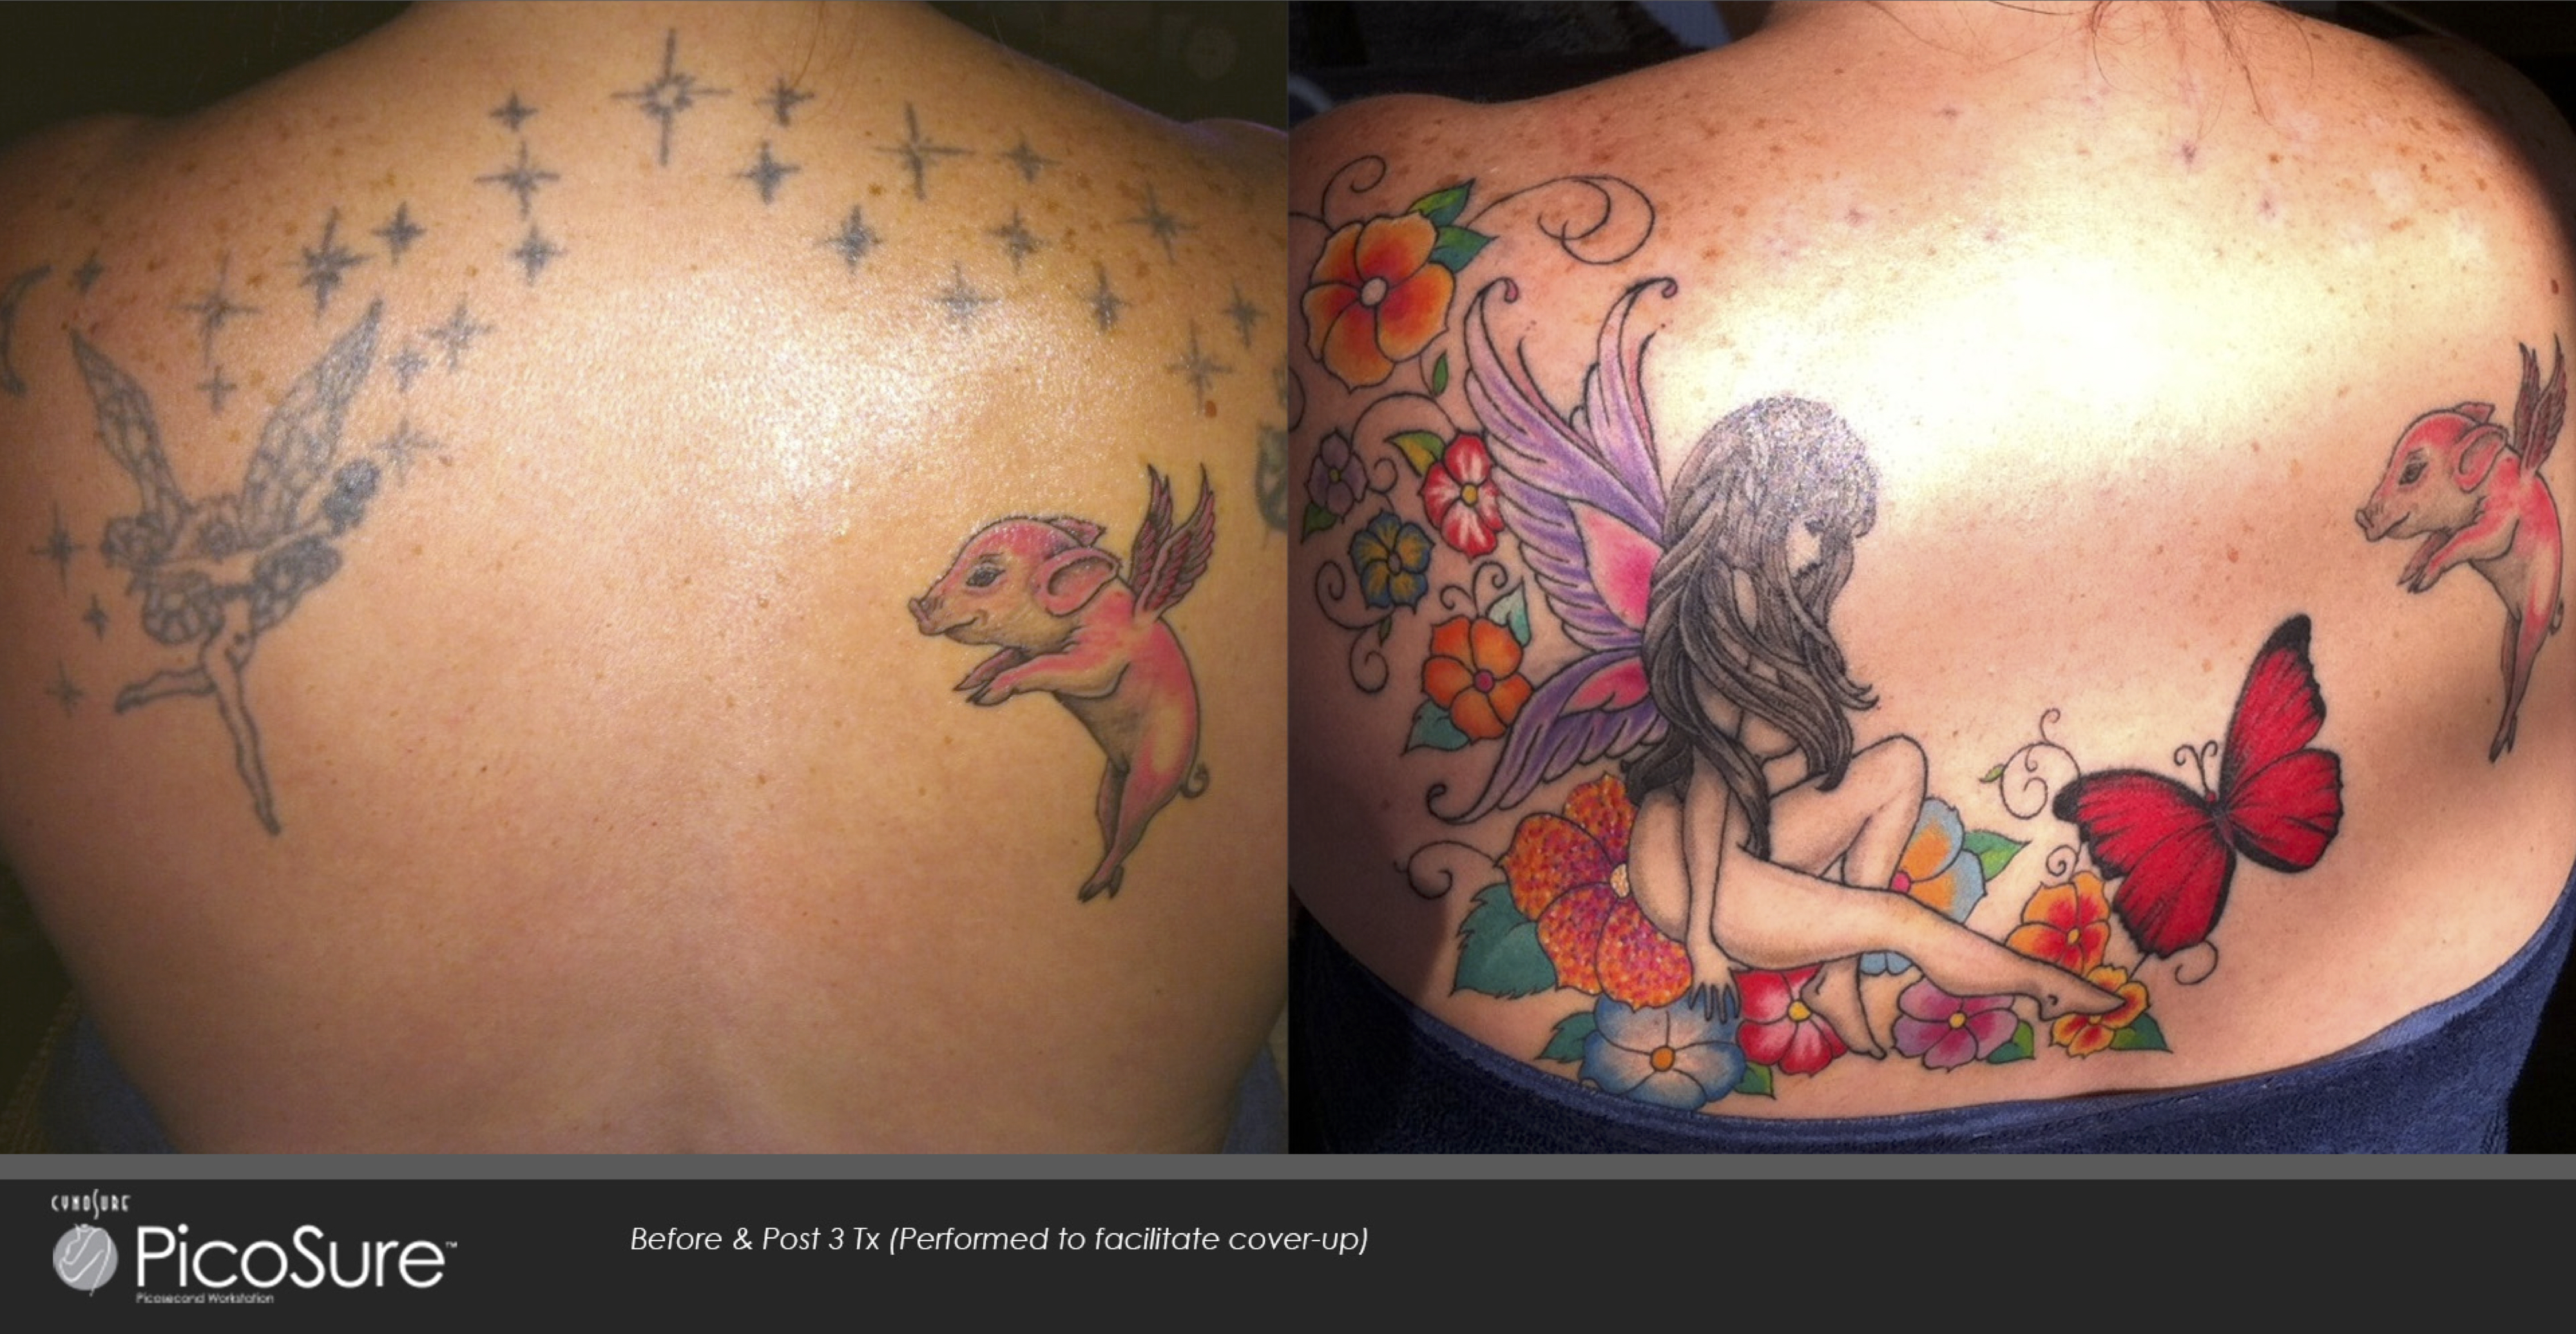 Best Tattoo Cover-Up | Orland Park Laser Tattoo Removal